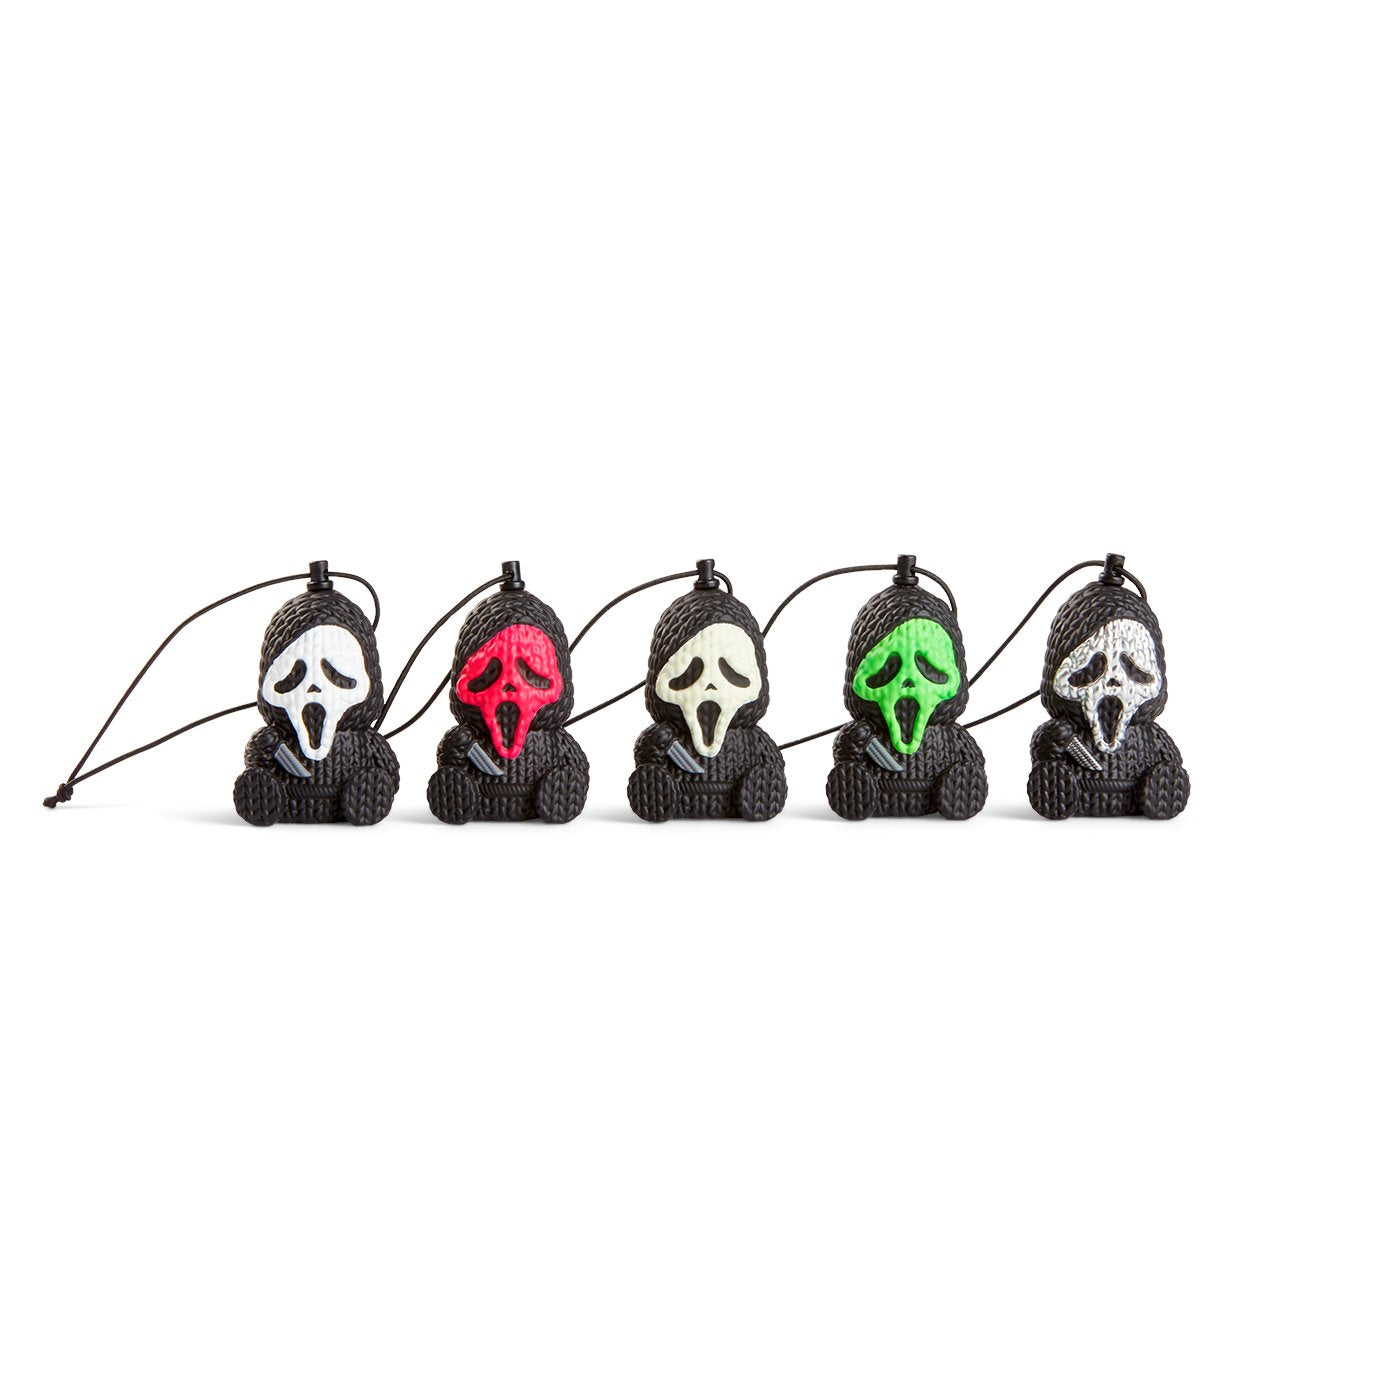 Handmade by Robots Ghost Face Micro 5 Pack Charms Set - (White, Pink, Glow in the Dark, Green, Silver)